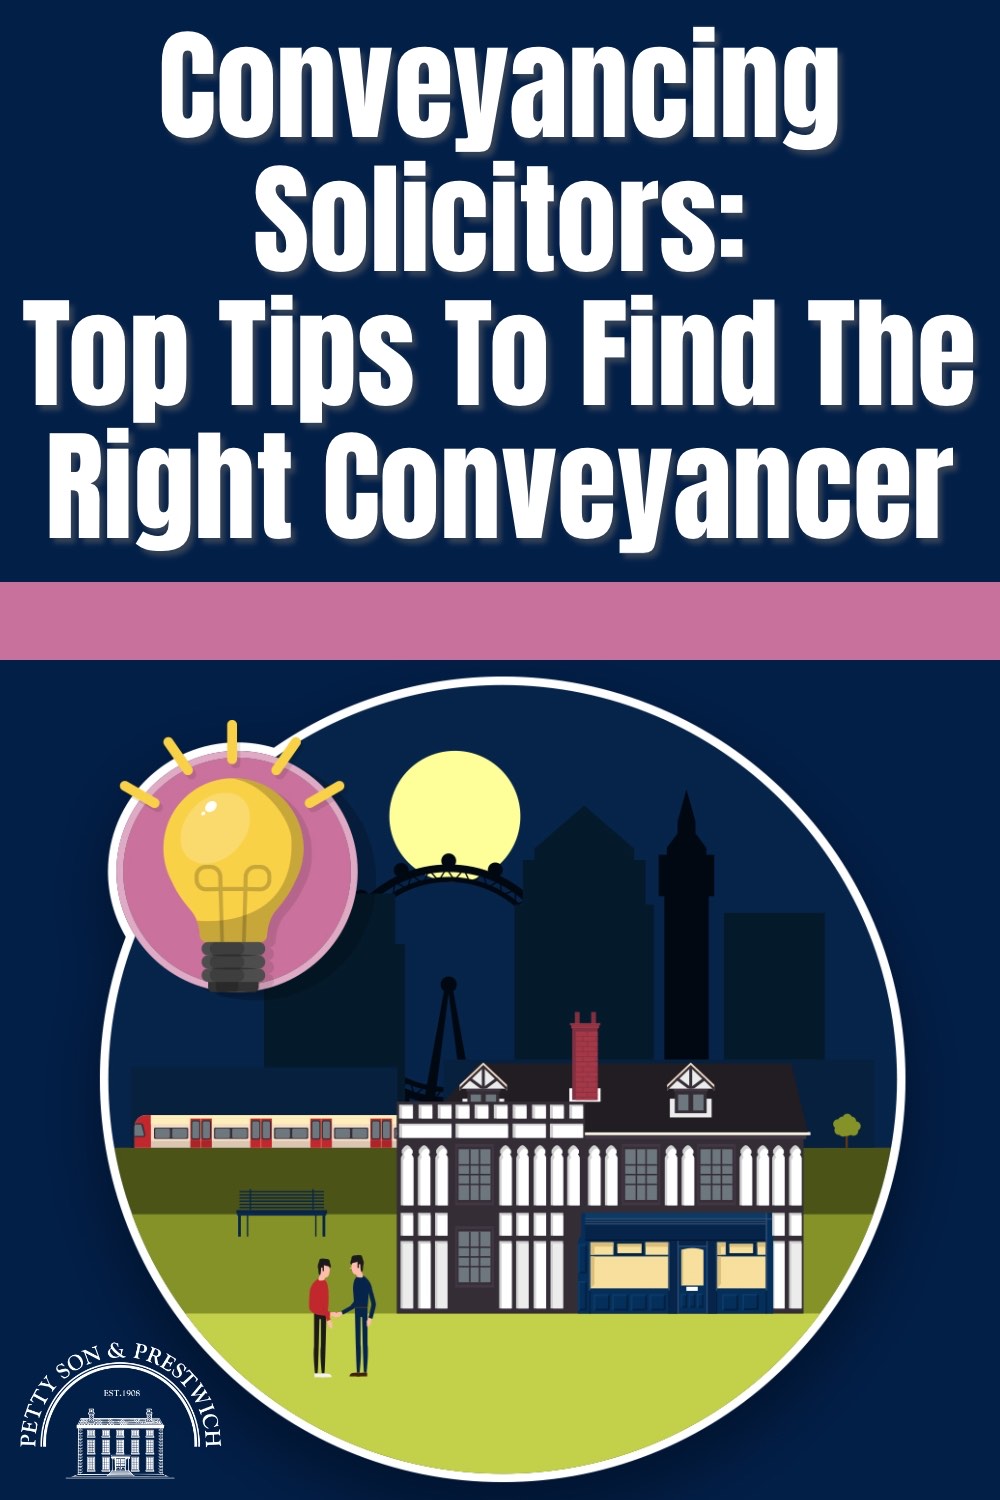 Tips To Find The Right Conveyancer